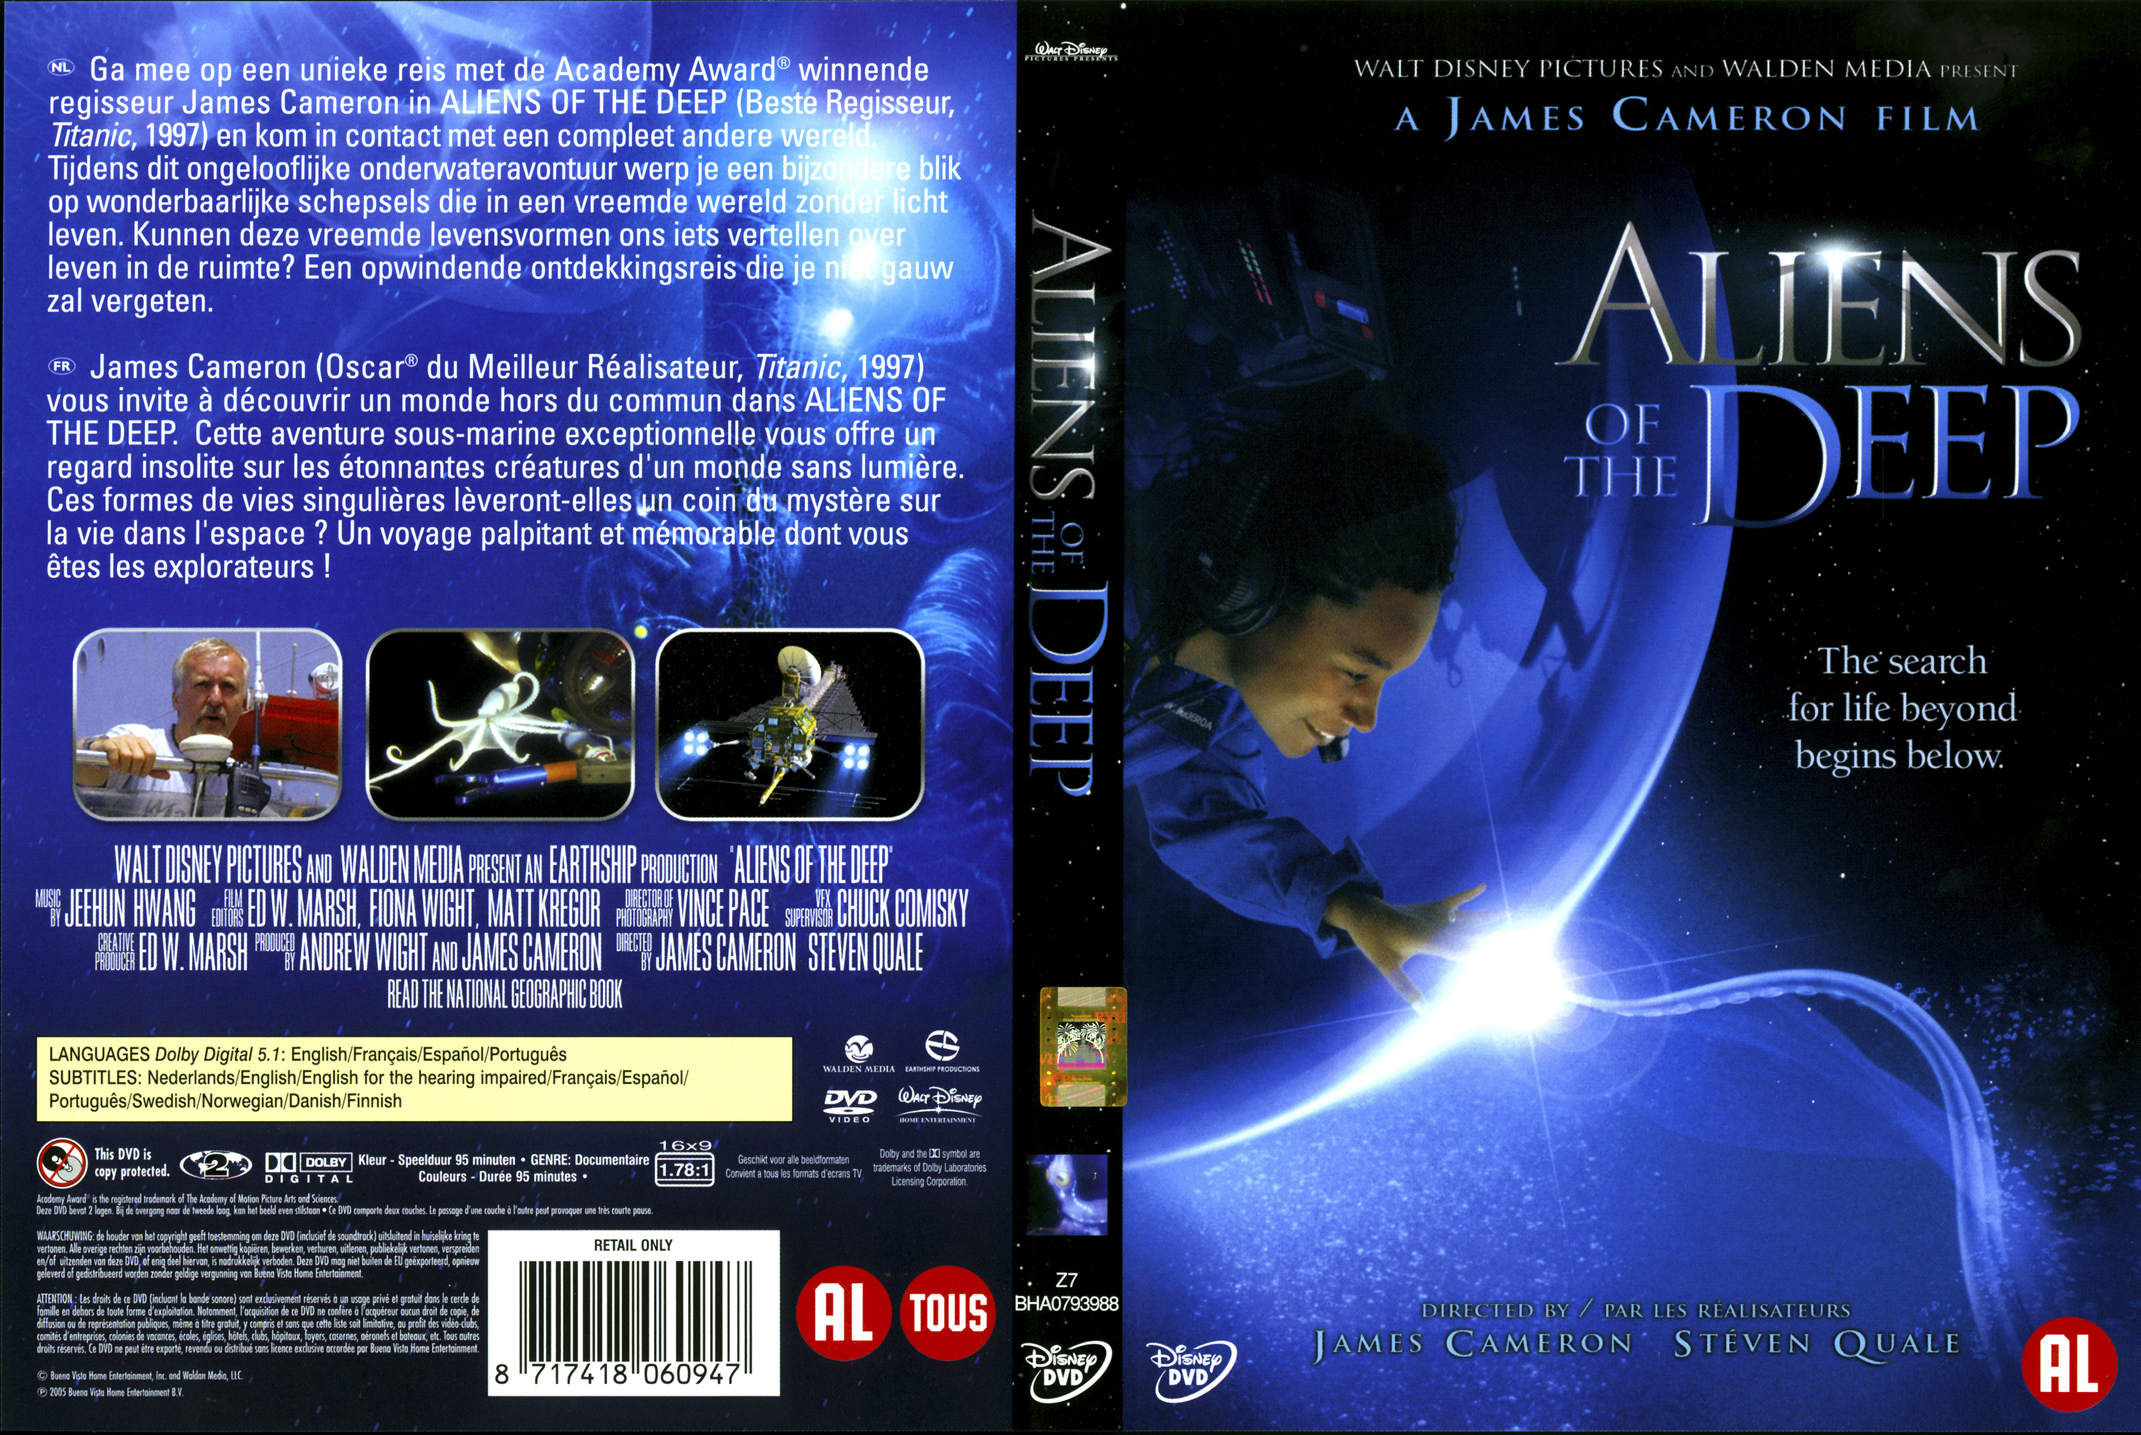 Jaquette DVD Aliens Of The Deep